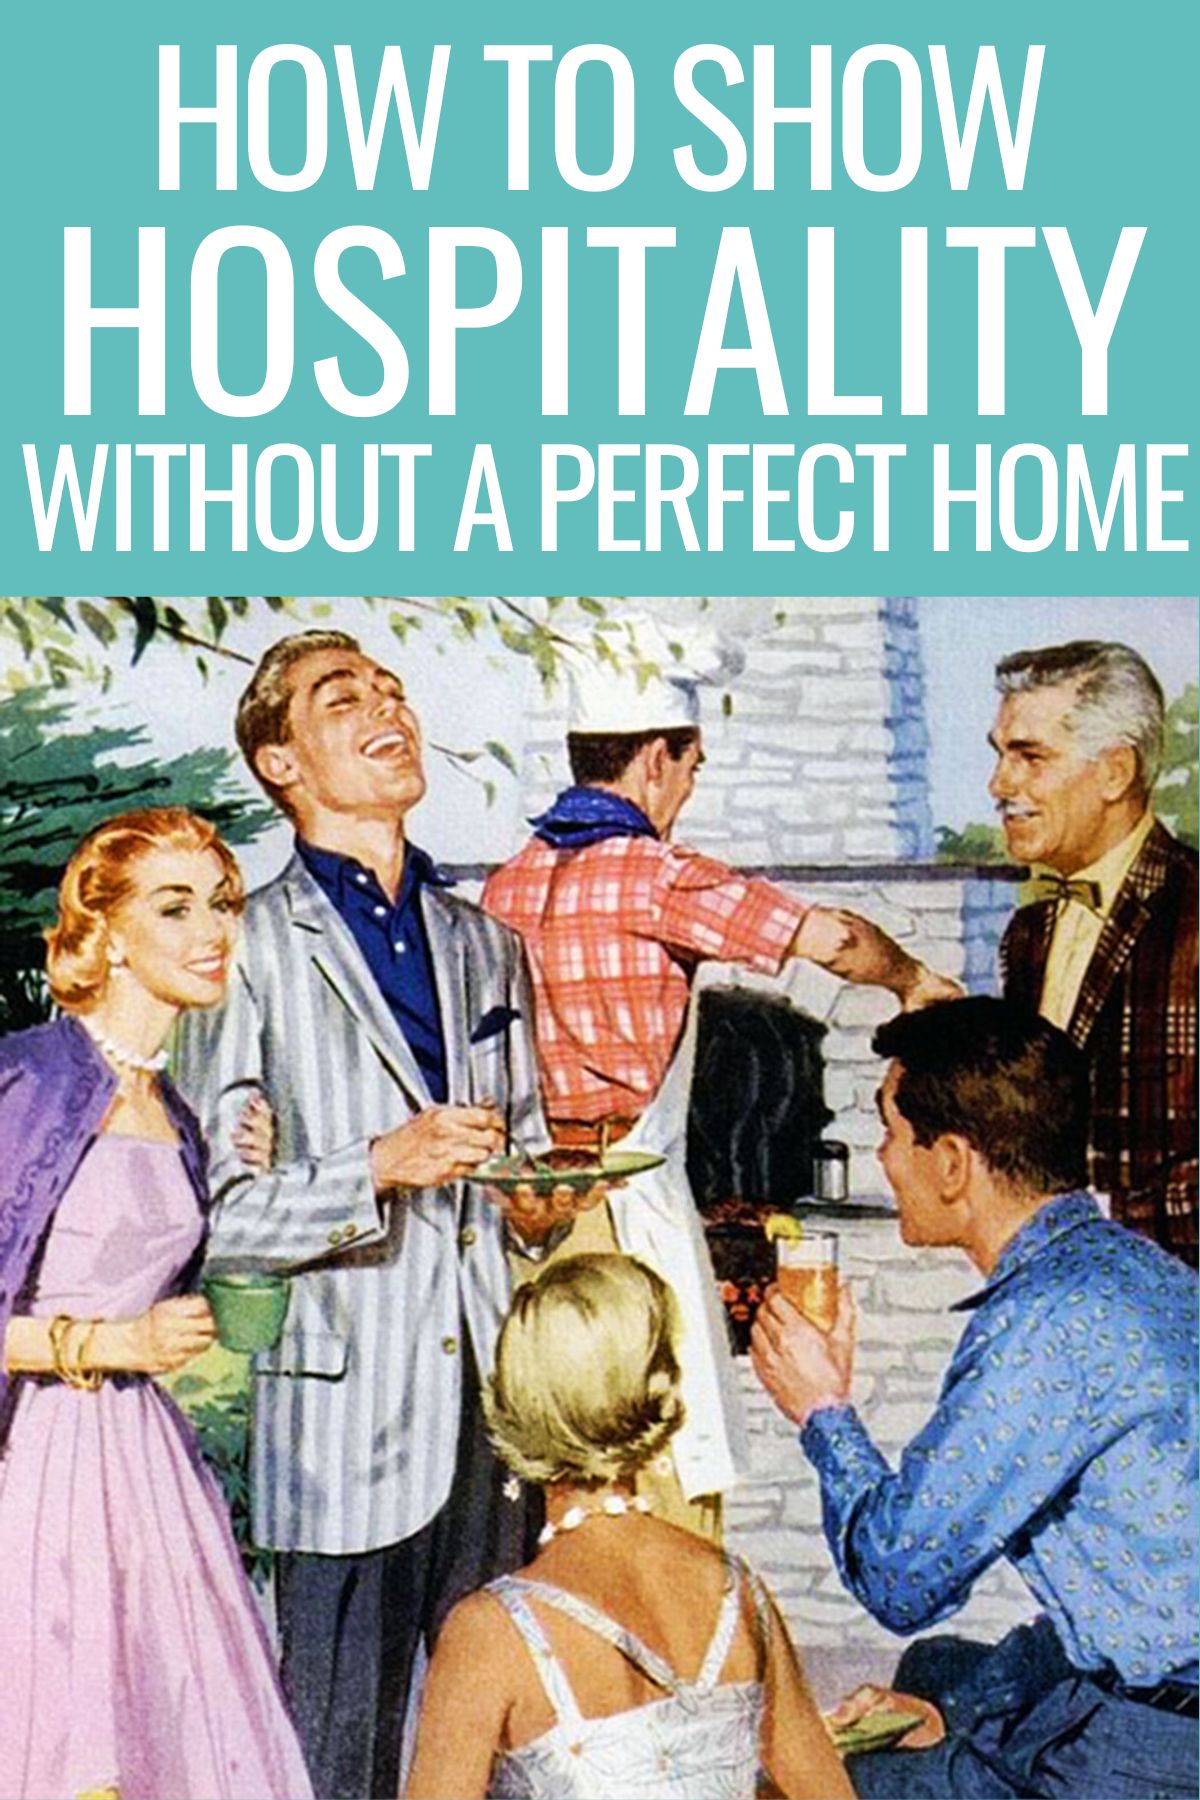 Graphic of vintage people outside by a grill chatting with text how to show hospitality without a perfect home. 